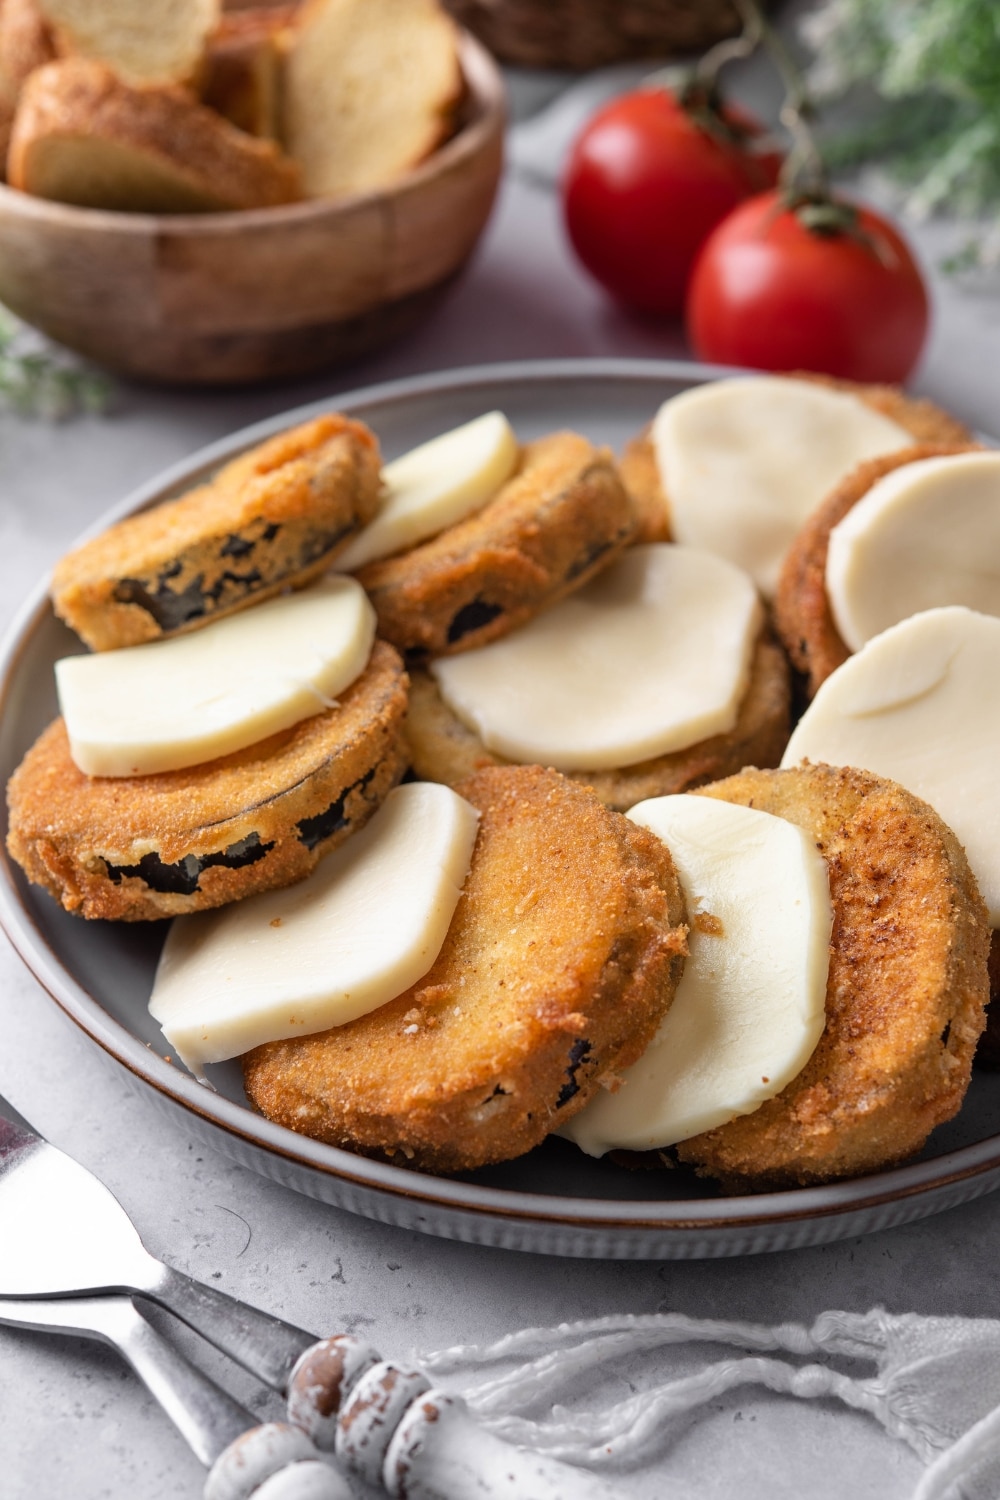 Fried eggplant slices layered with slices of mozzarella cheese on a plate.